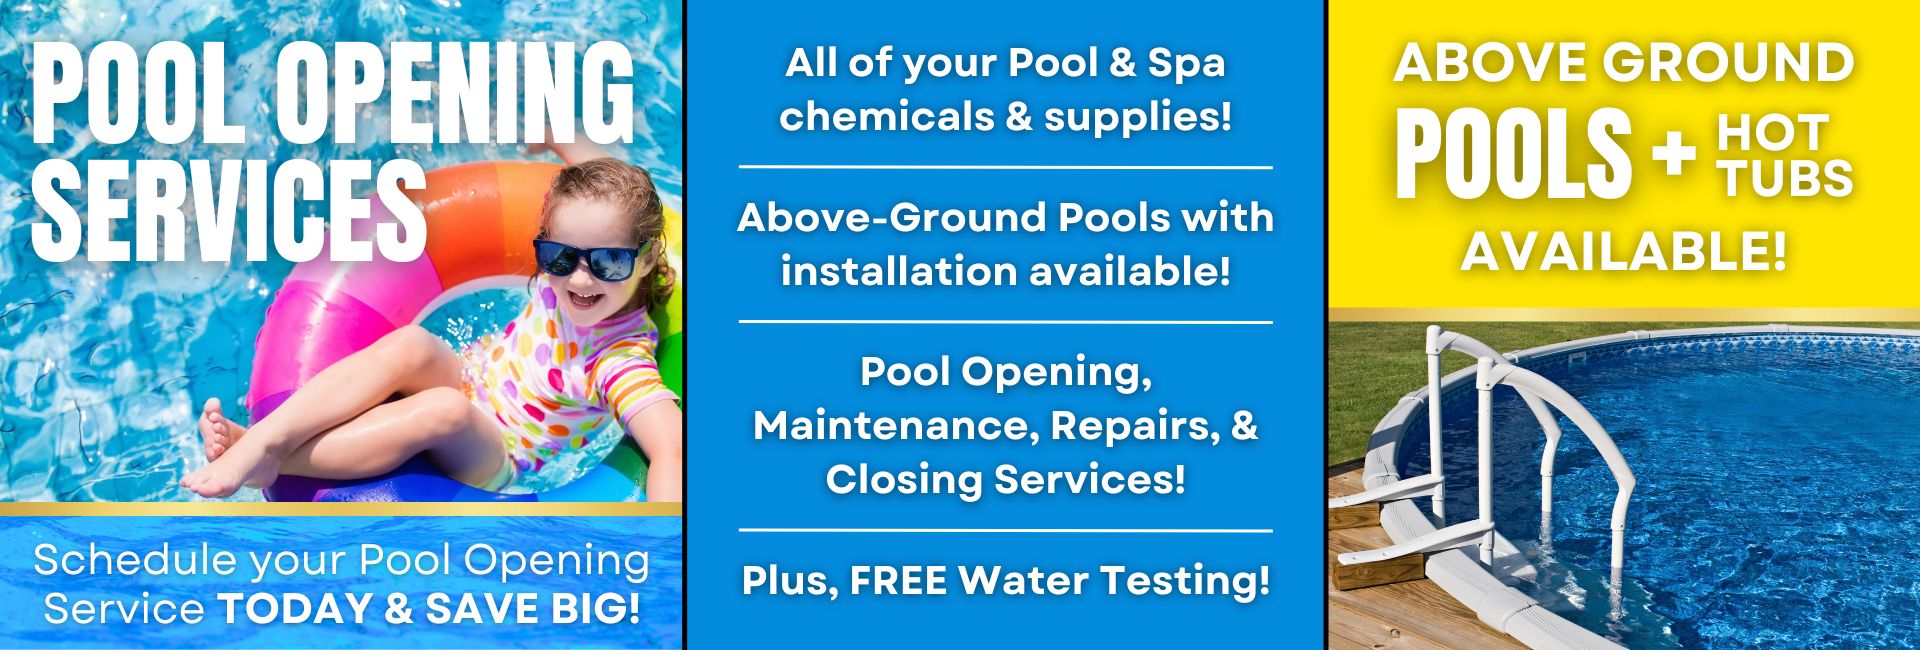 Pool Opening Services Available!